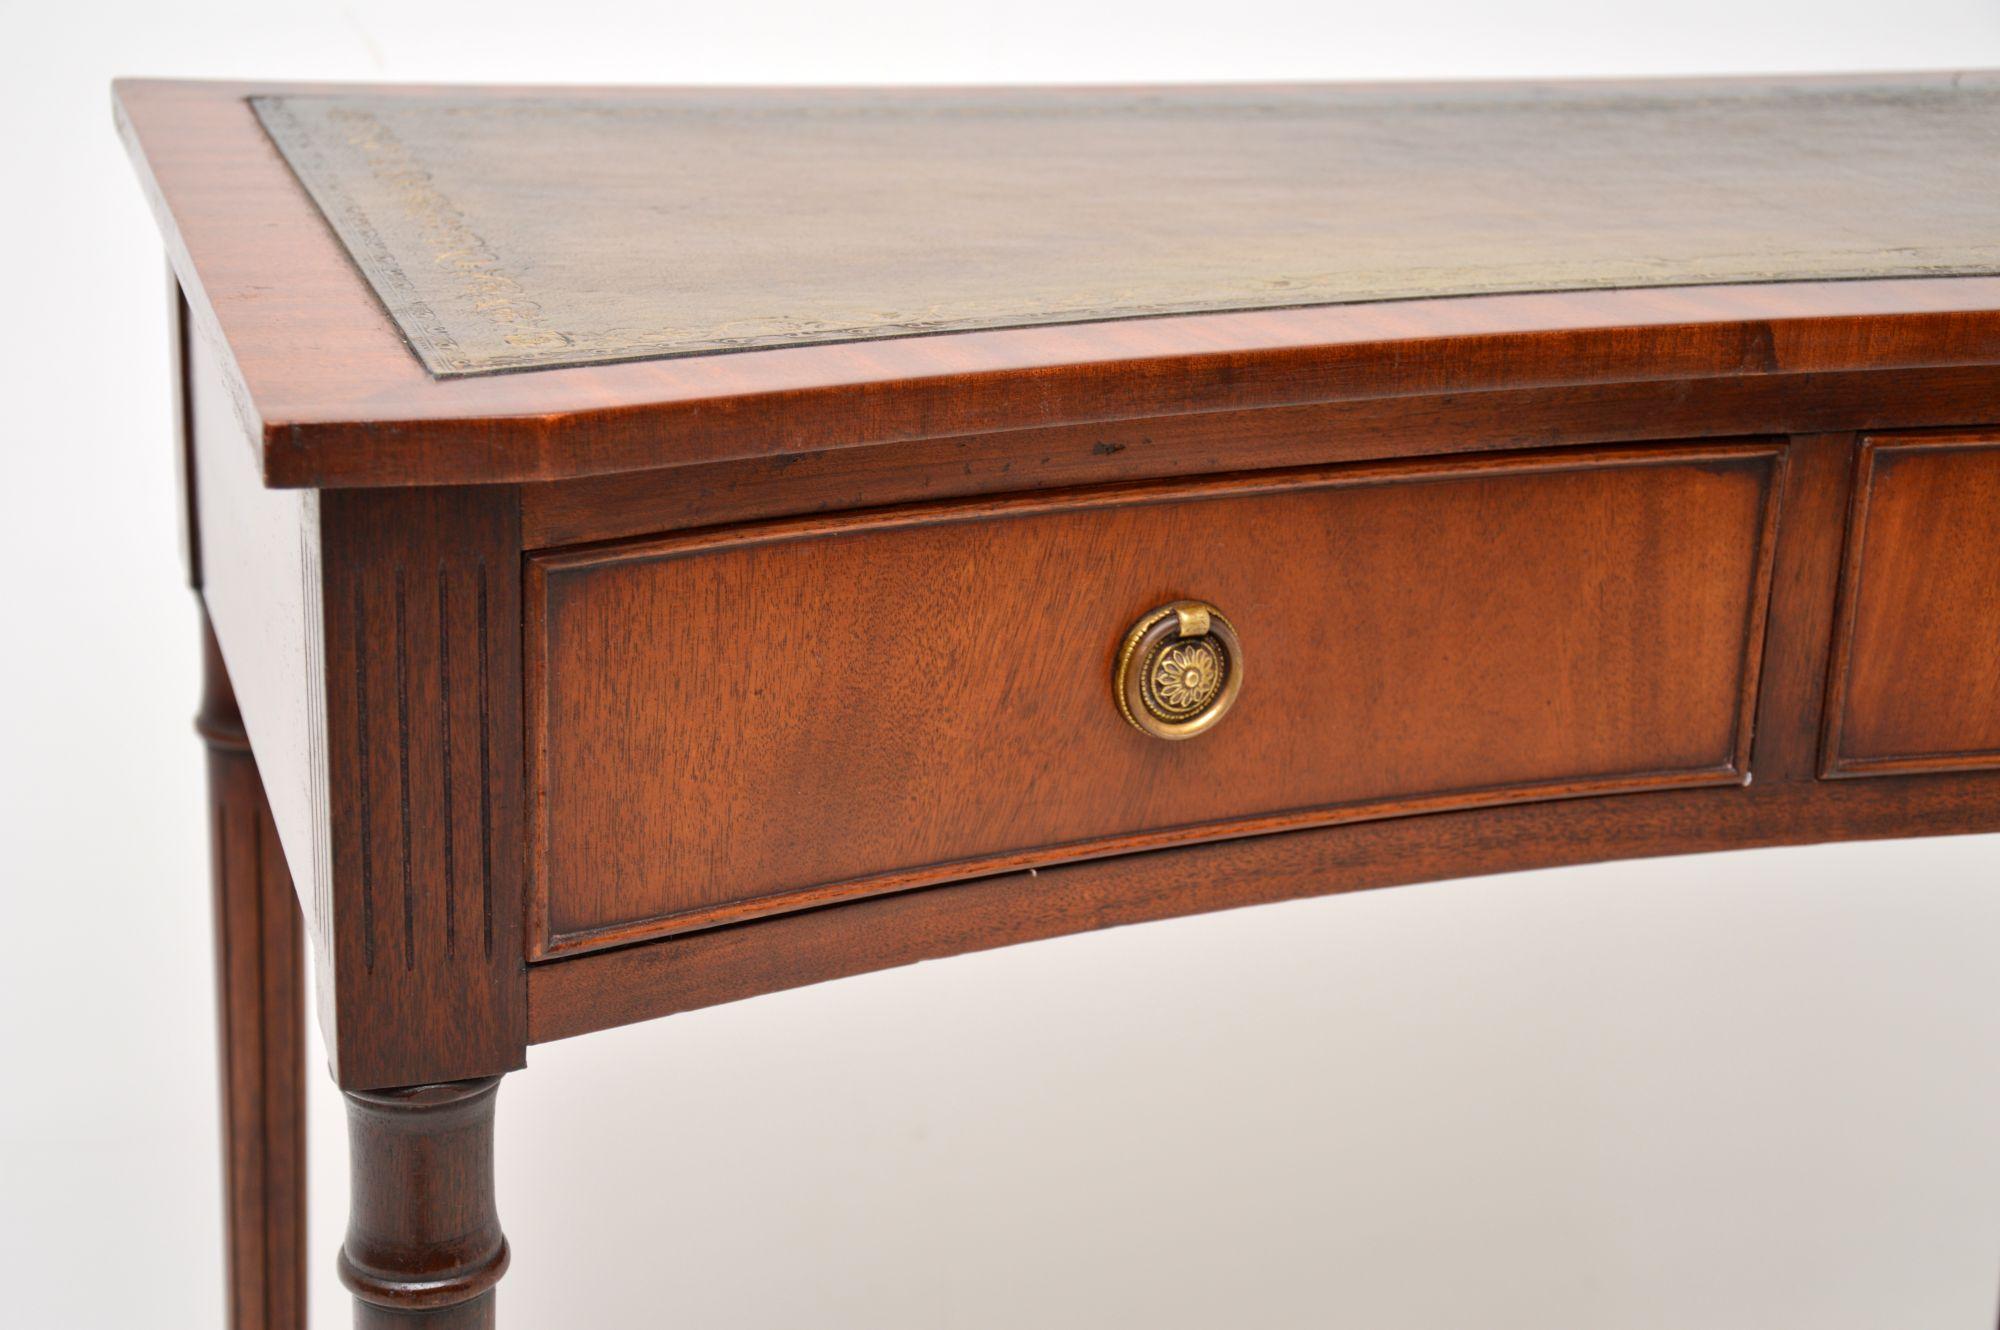 Regency Antique Leather Top Writing Table / Desk